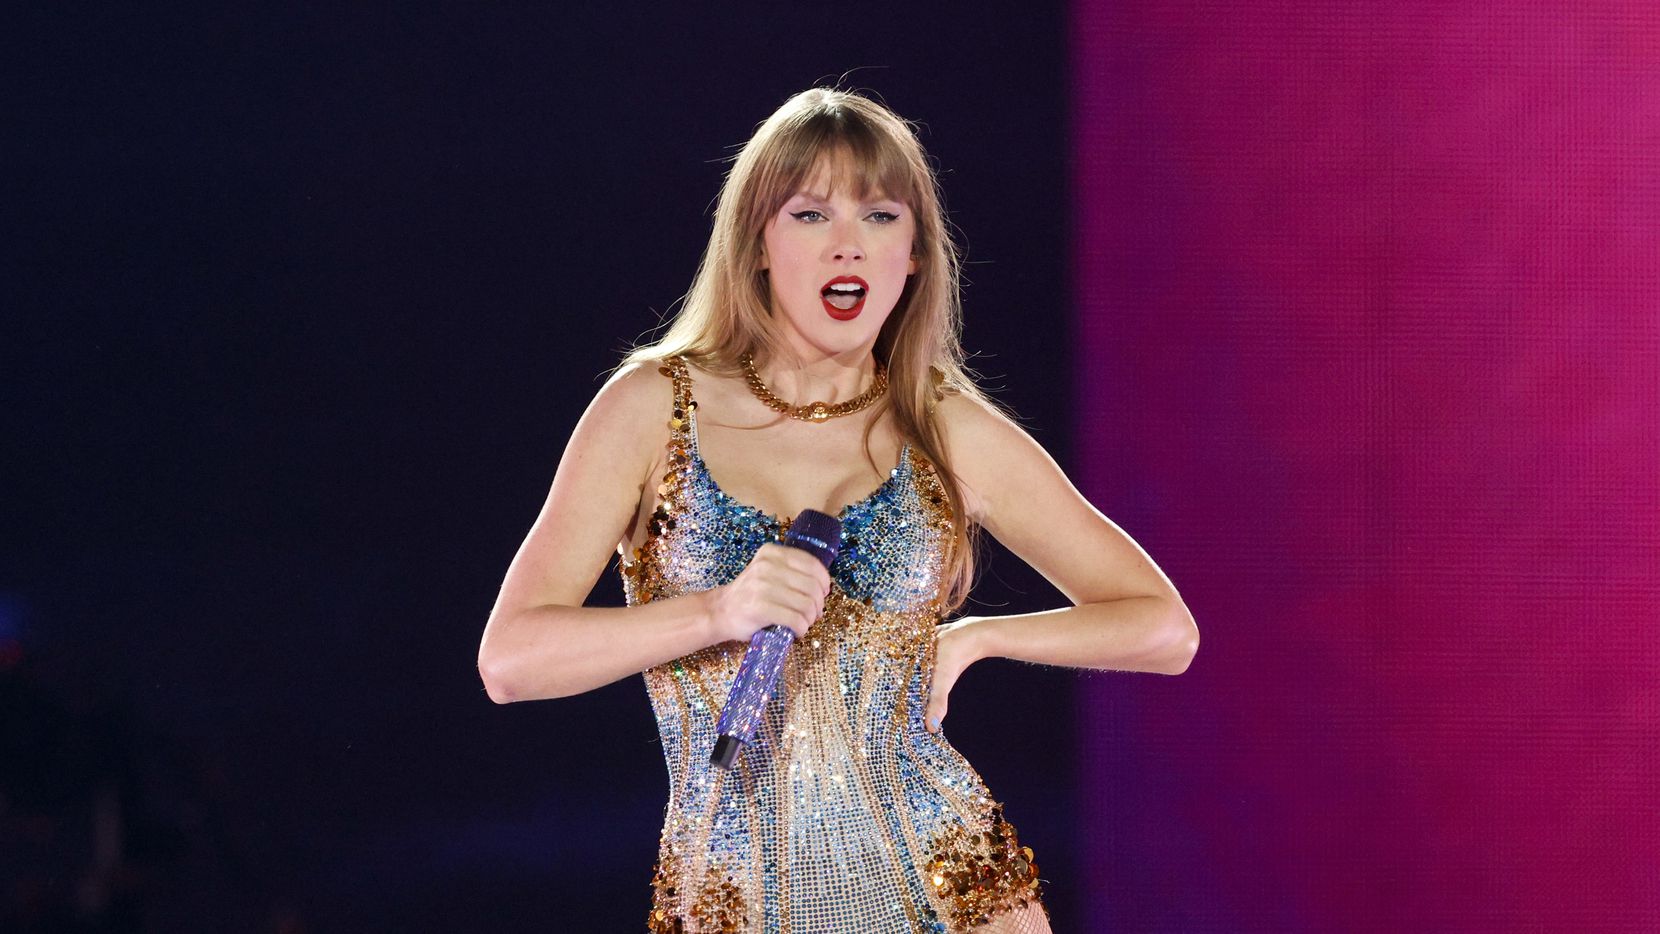 See photo from the Taylor Swift Eras Tour concert in Arlington